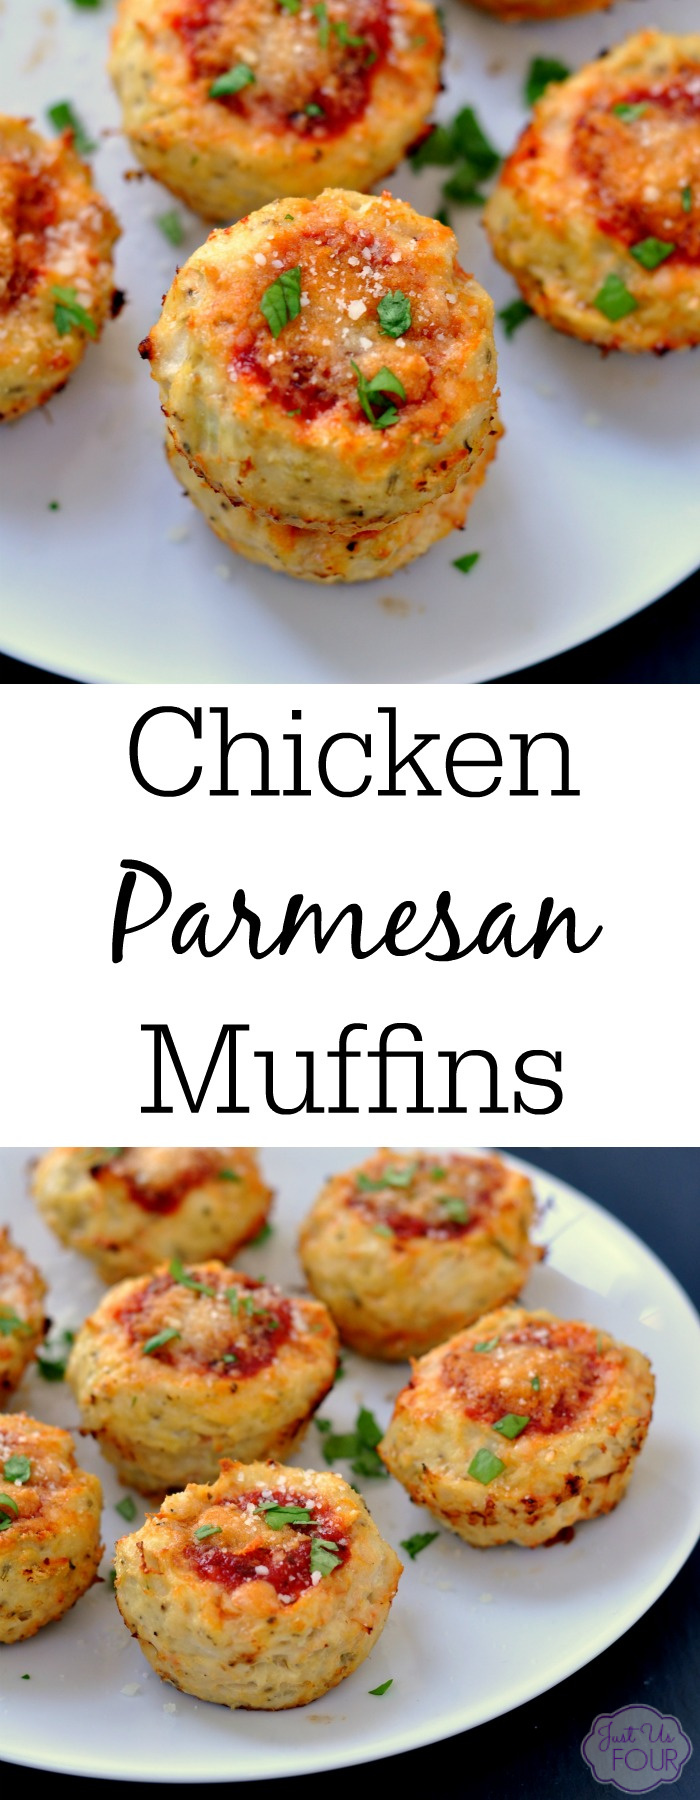 Chicken Parmesan muffins are the perfect weeknight meal that everyone in your family will love!